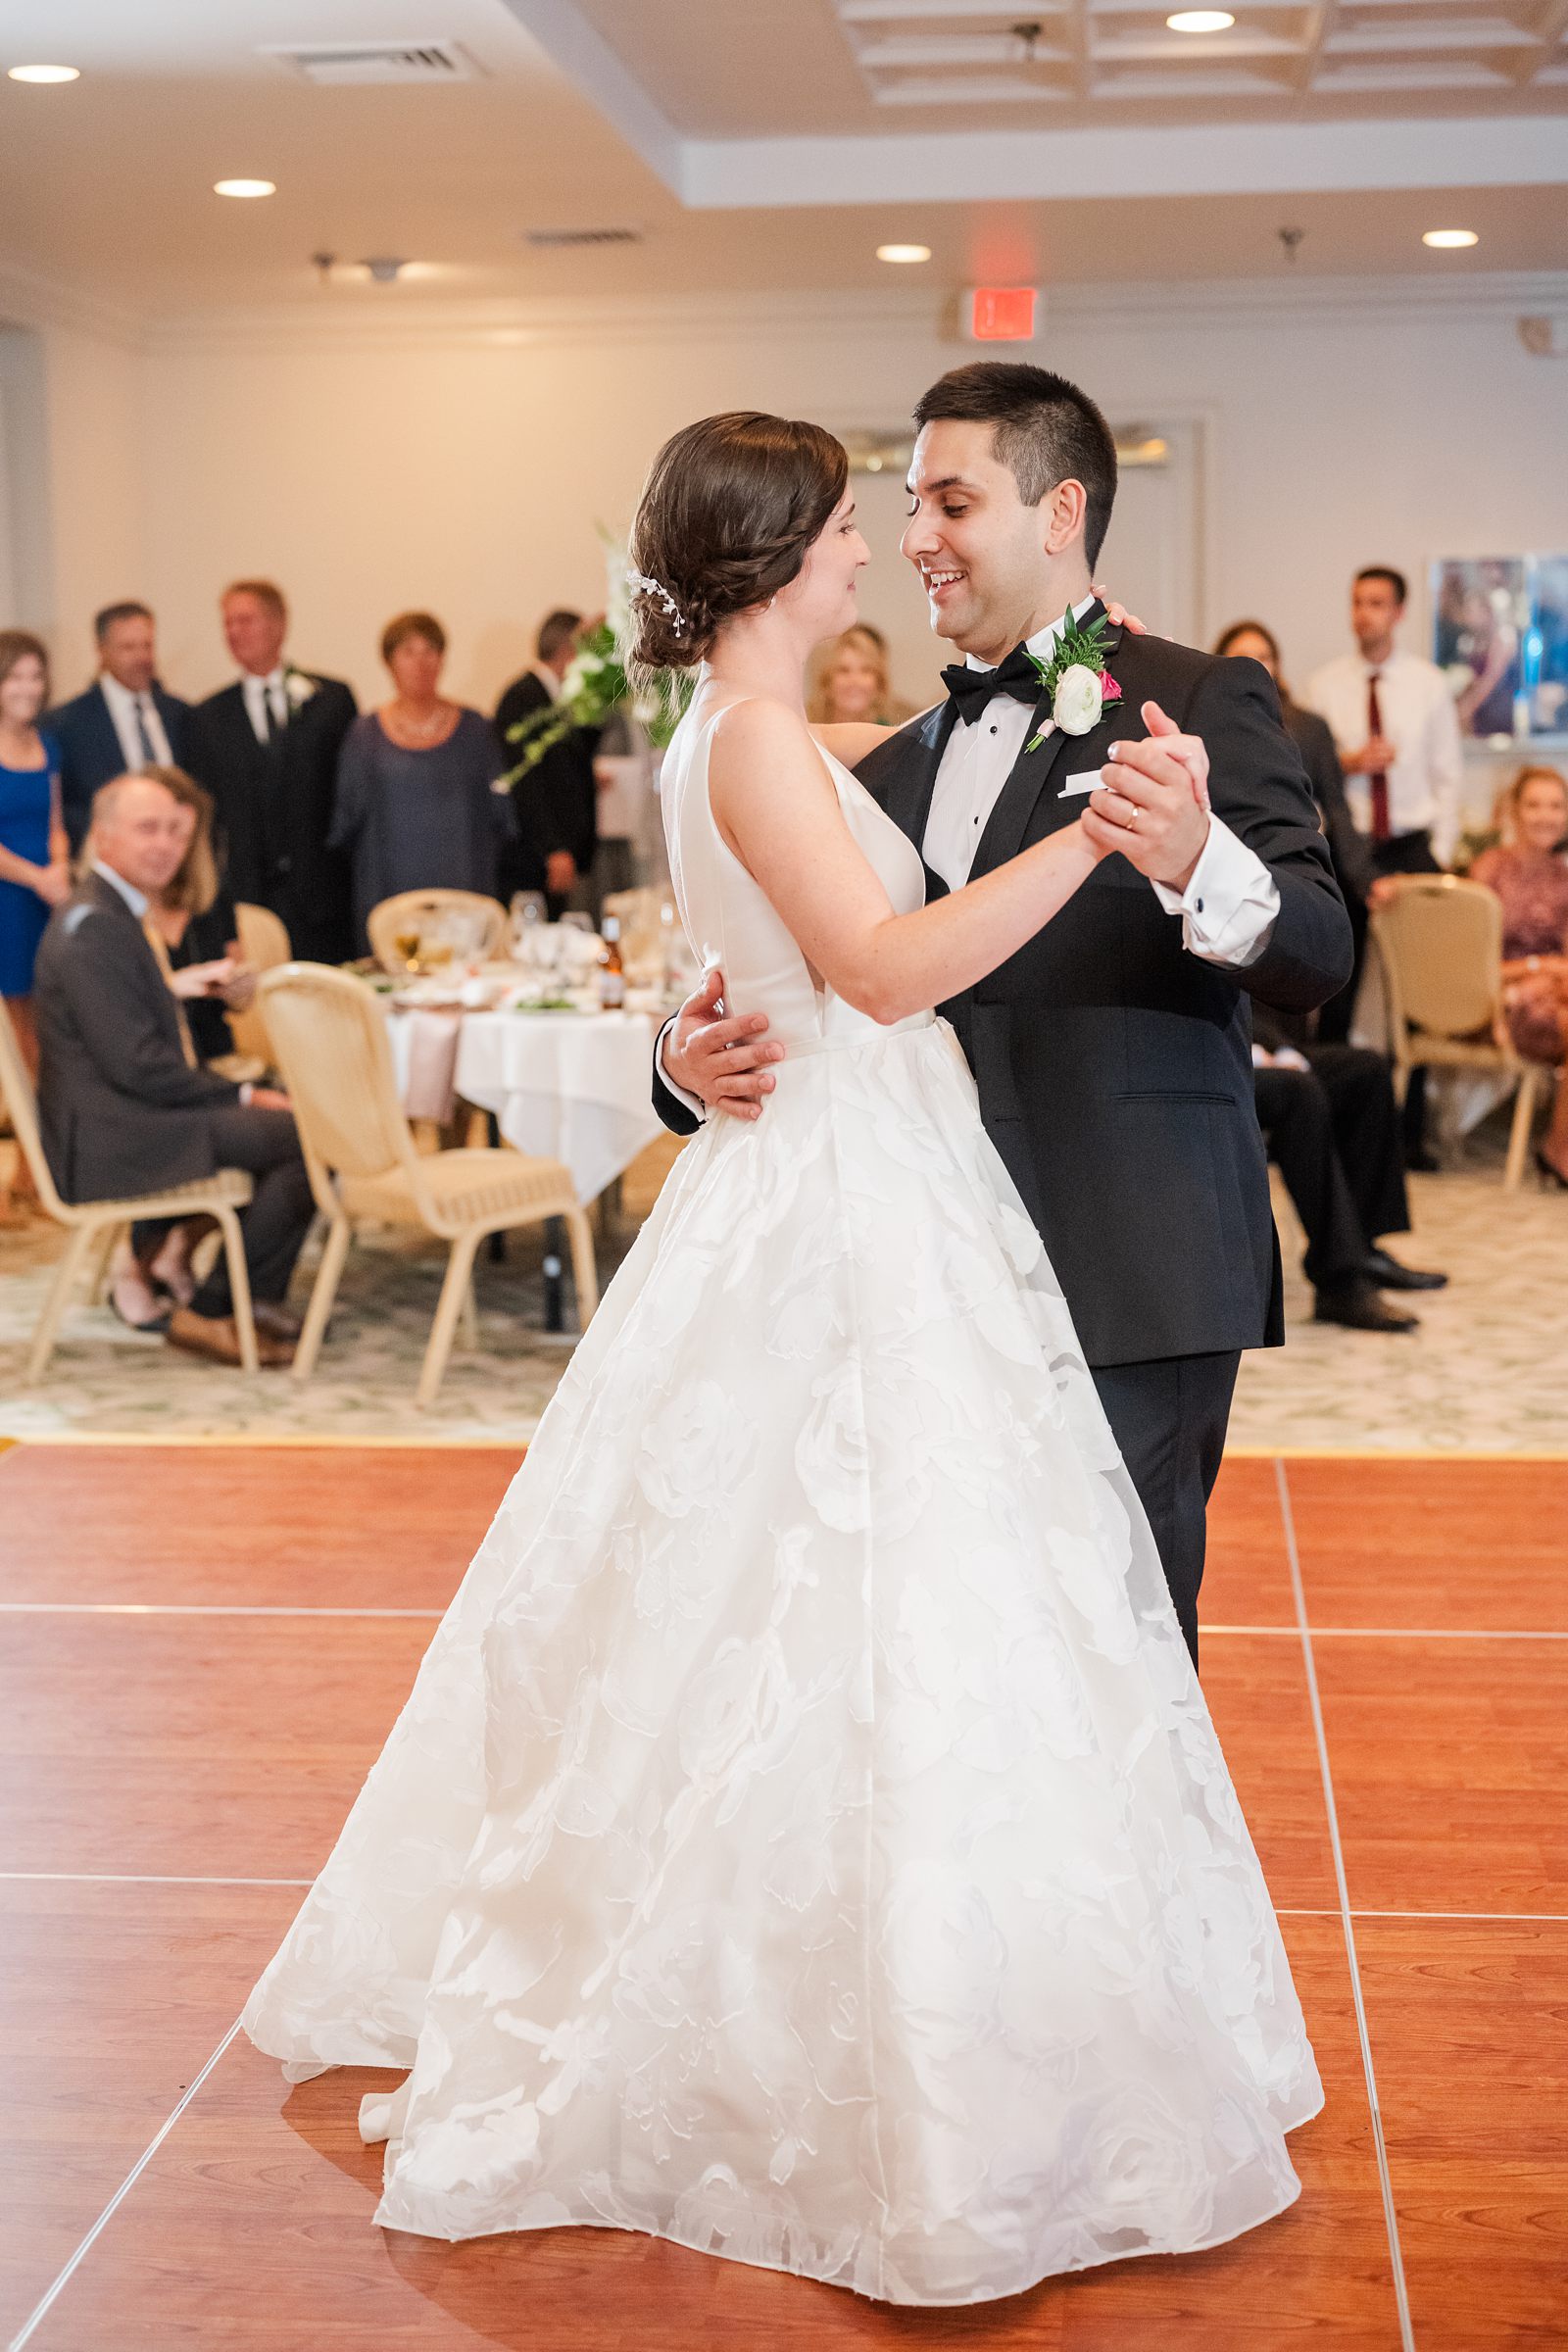 Bride and Groom First Dance at Fall Hermitage Country Club Wedding Reception